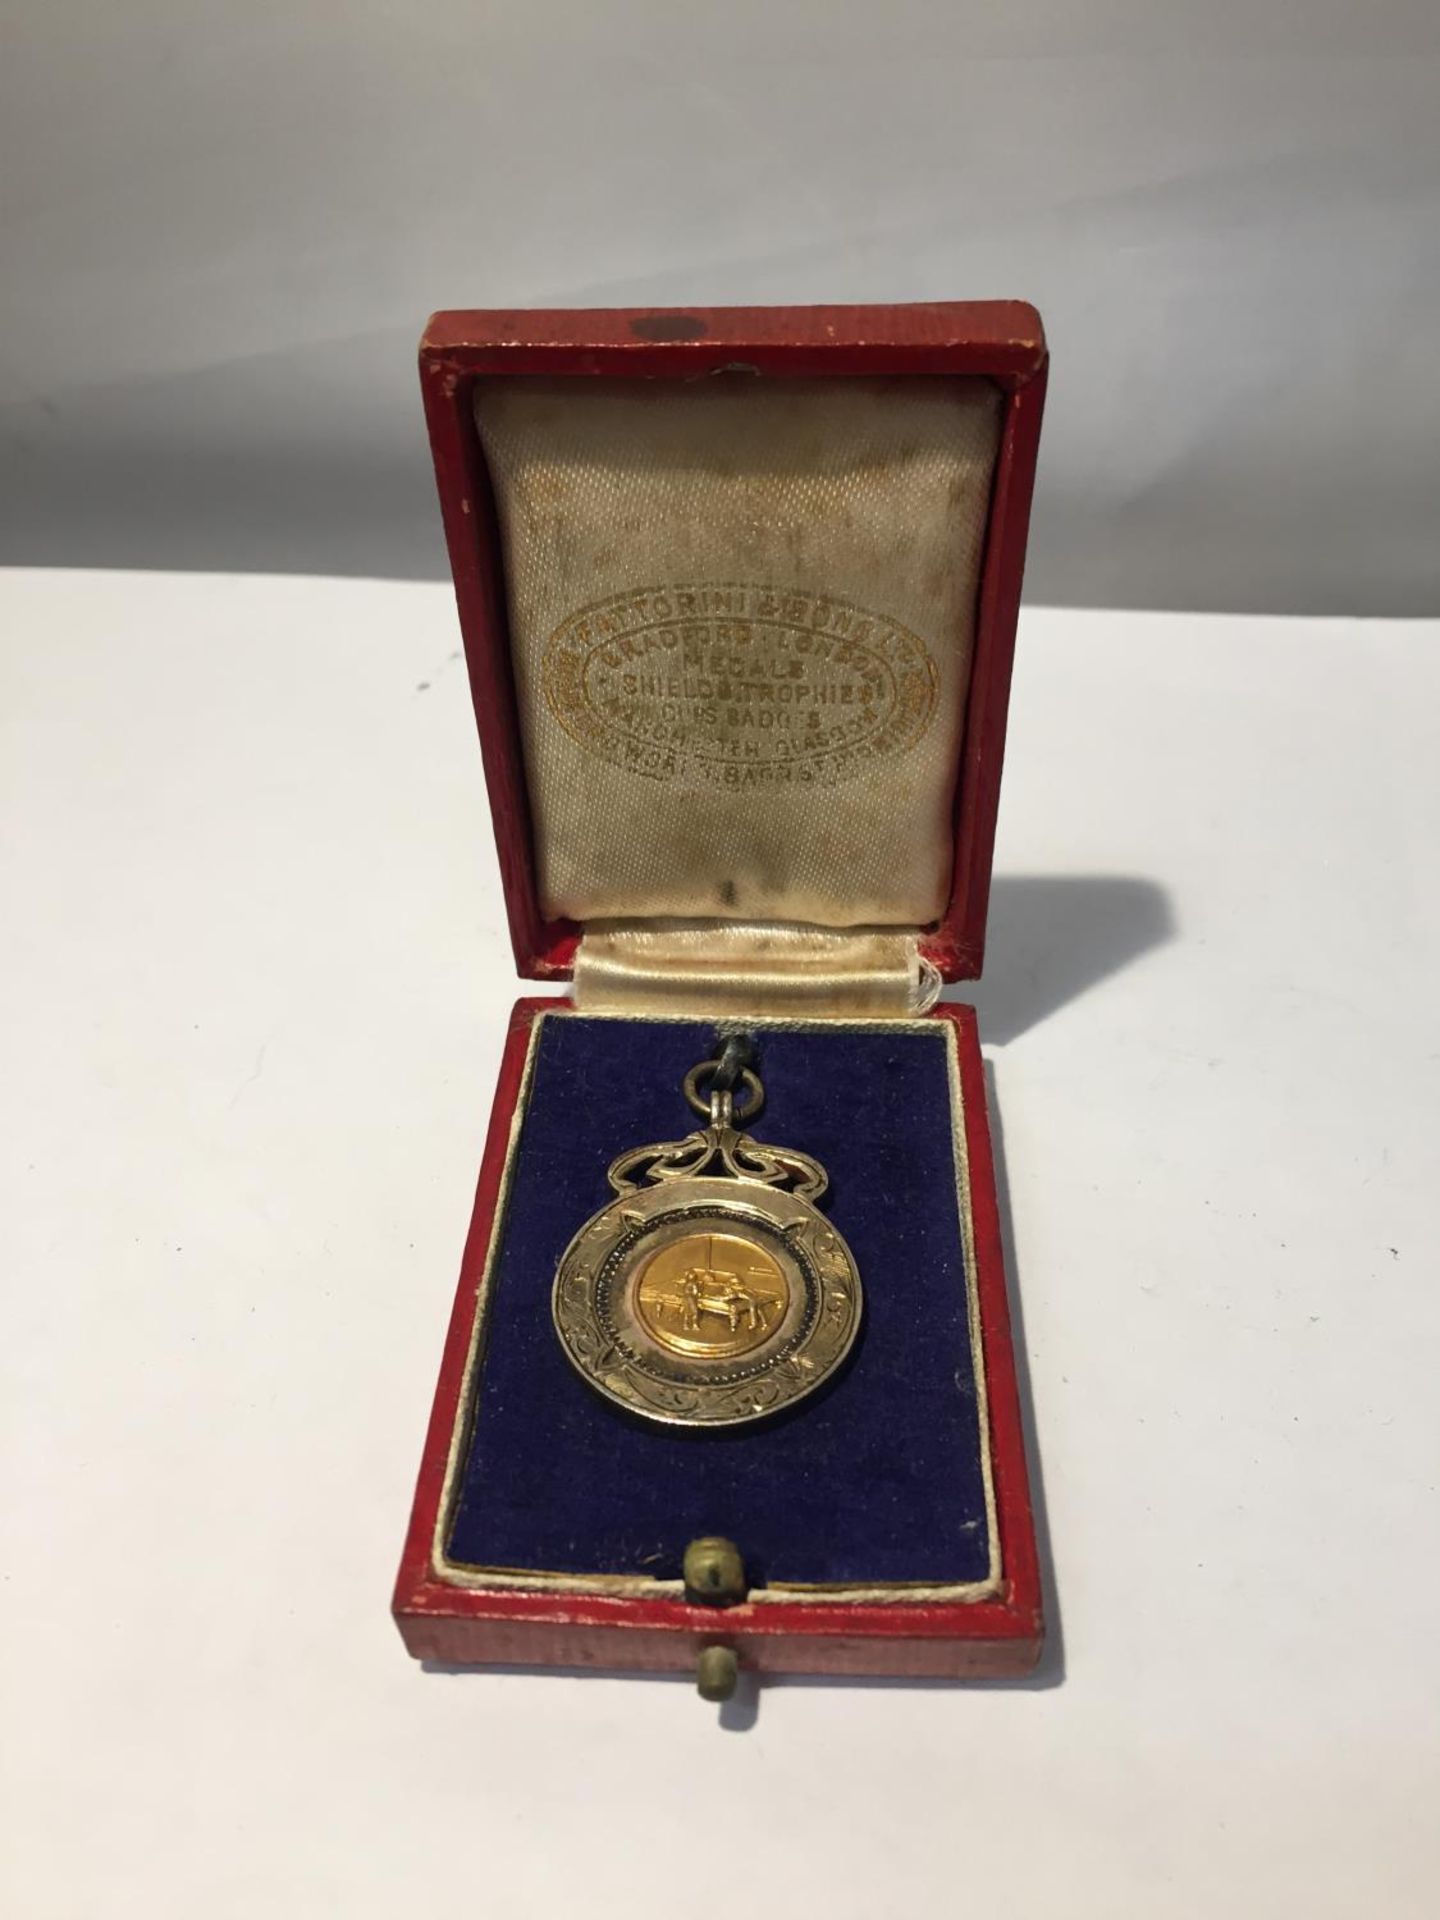 A MARKED SILVER MEDAL ENGRAVED 1938 WITH A PRESENTATION BOX